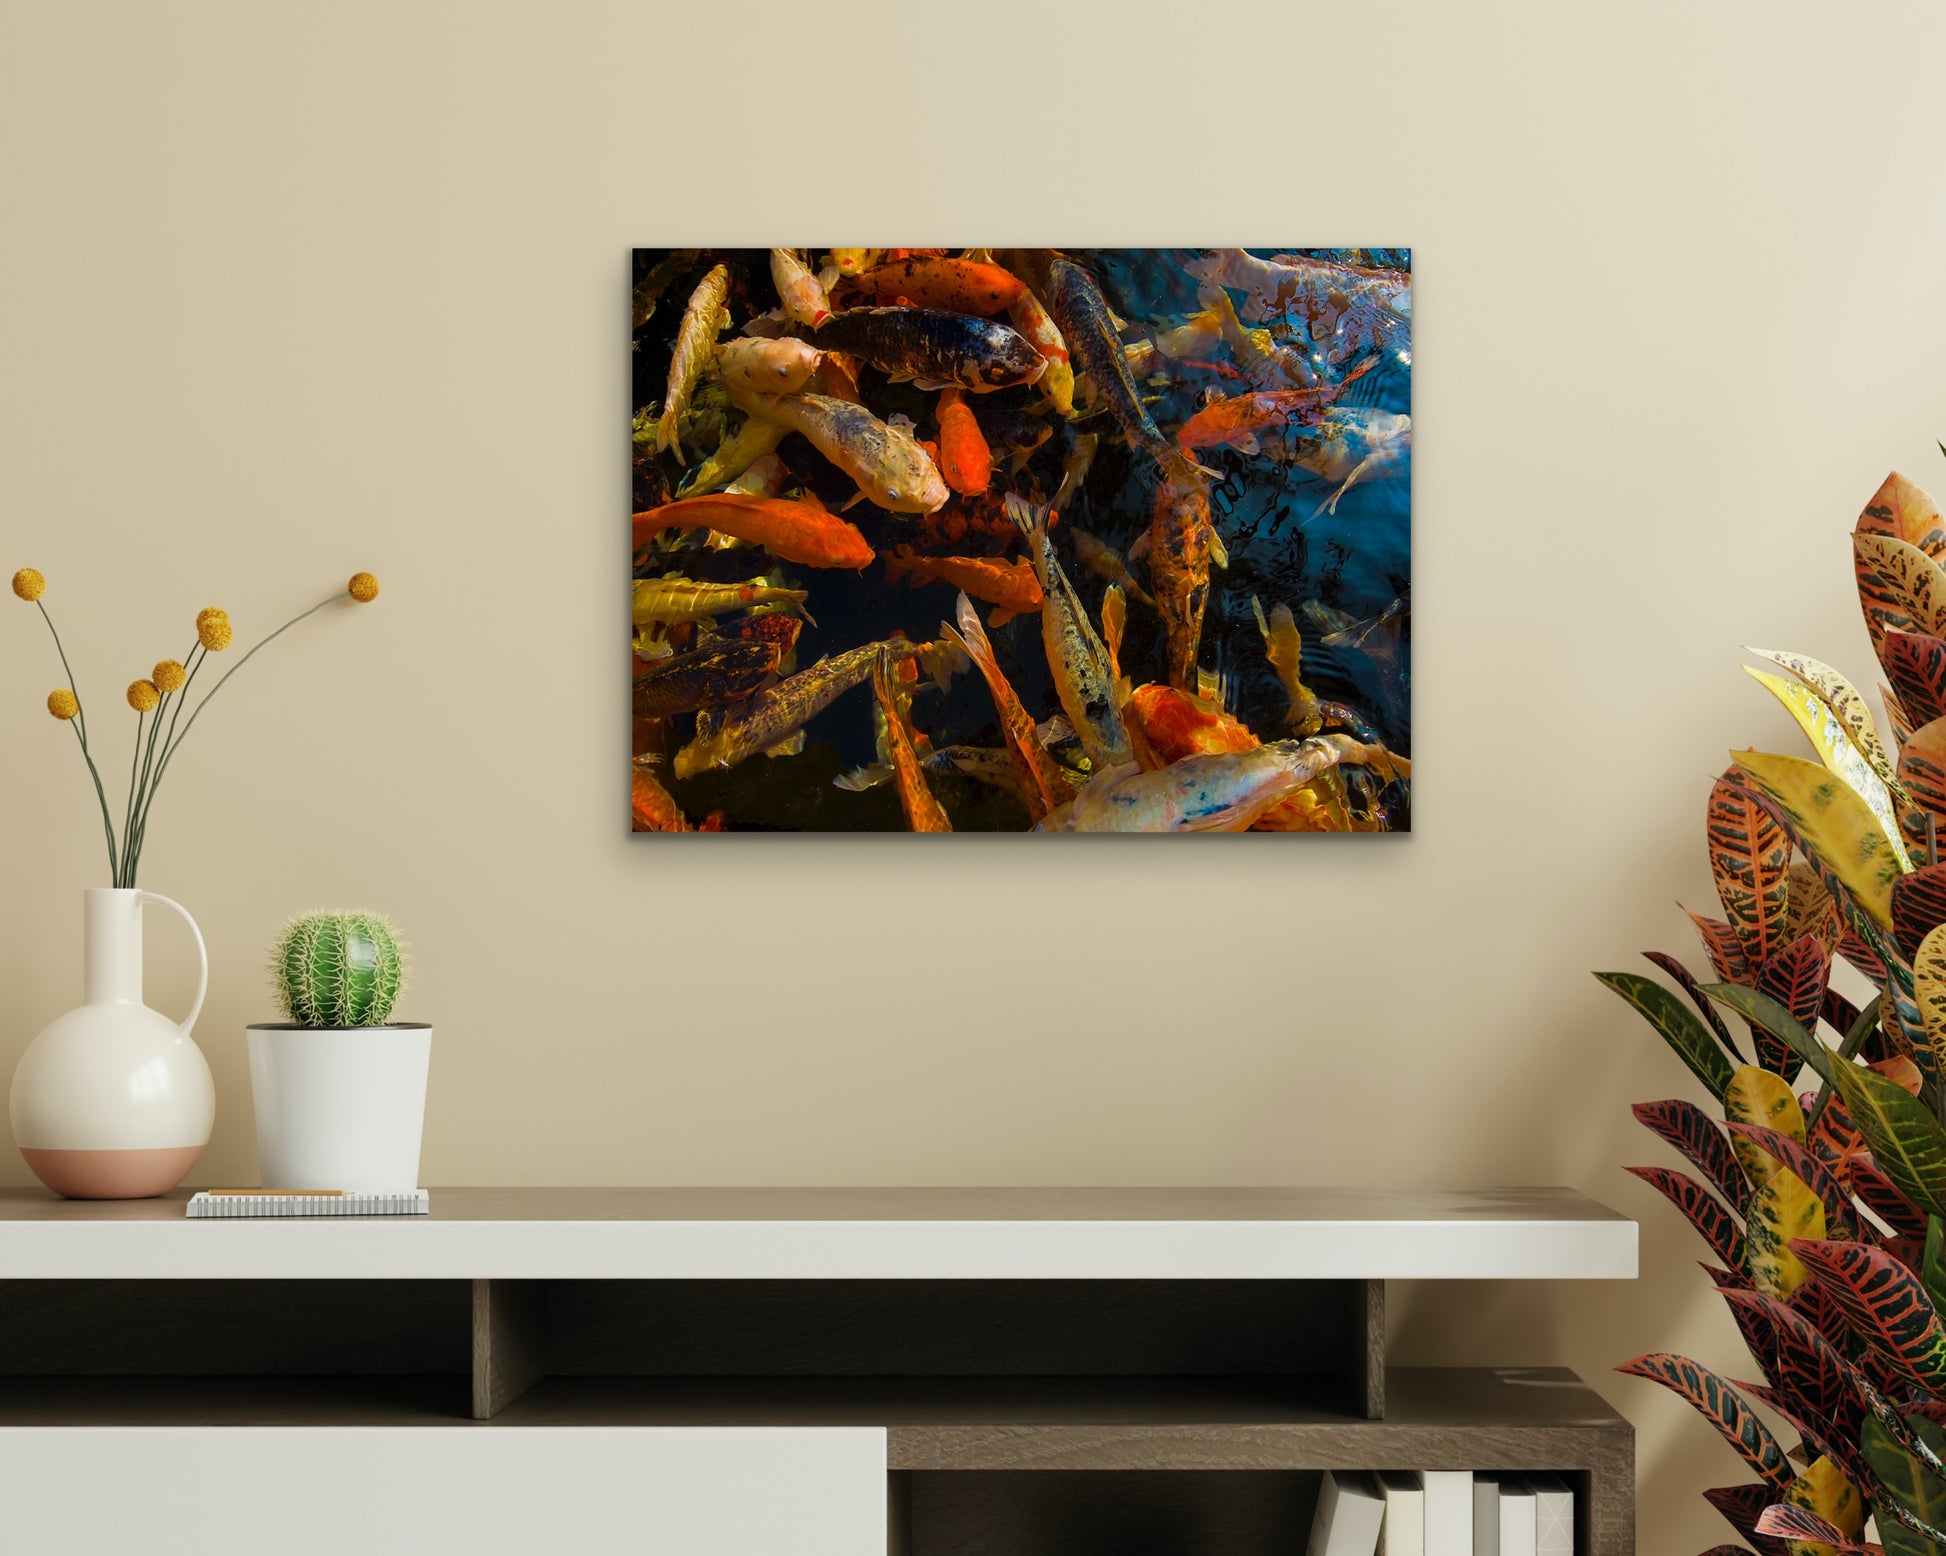 Wall demo of Koi Fish, a fine art photograph by Inspiring Images Hawaii.